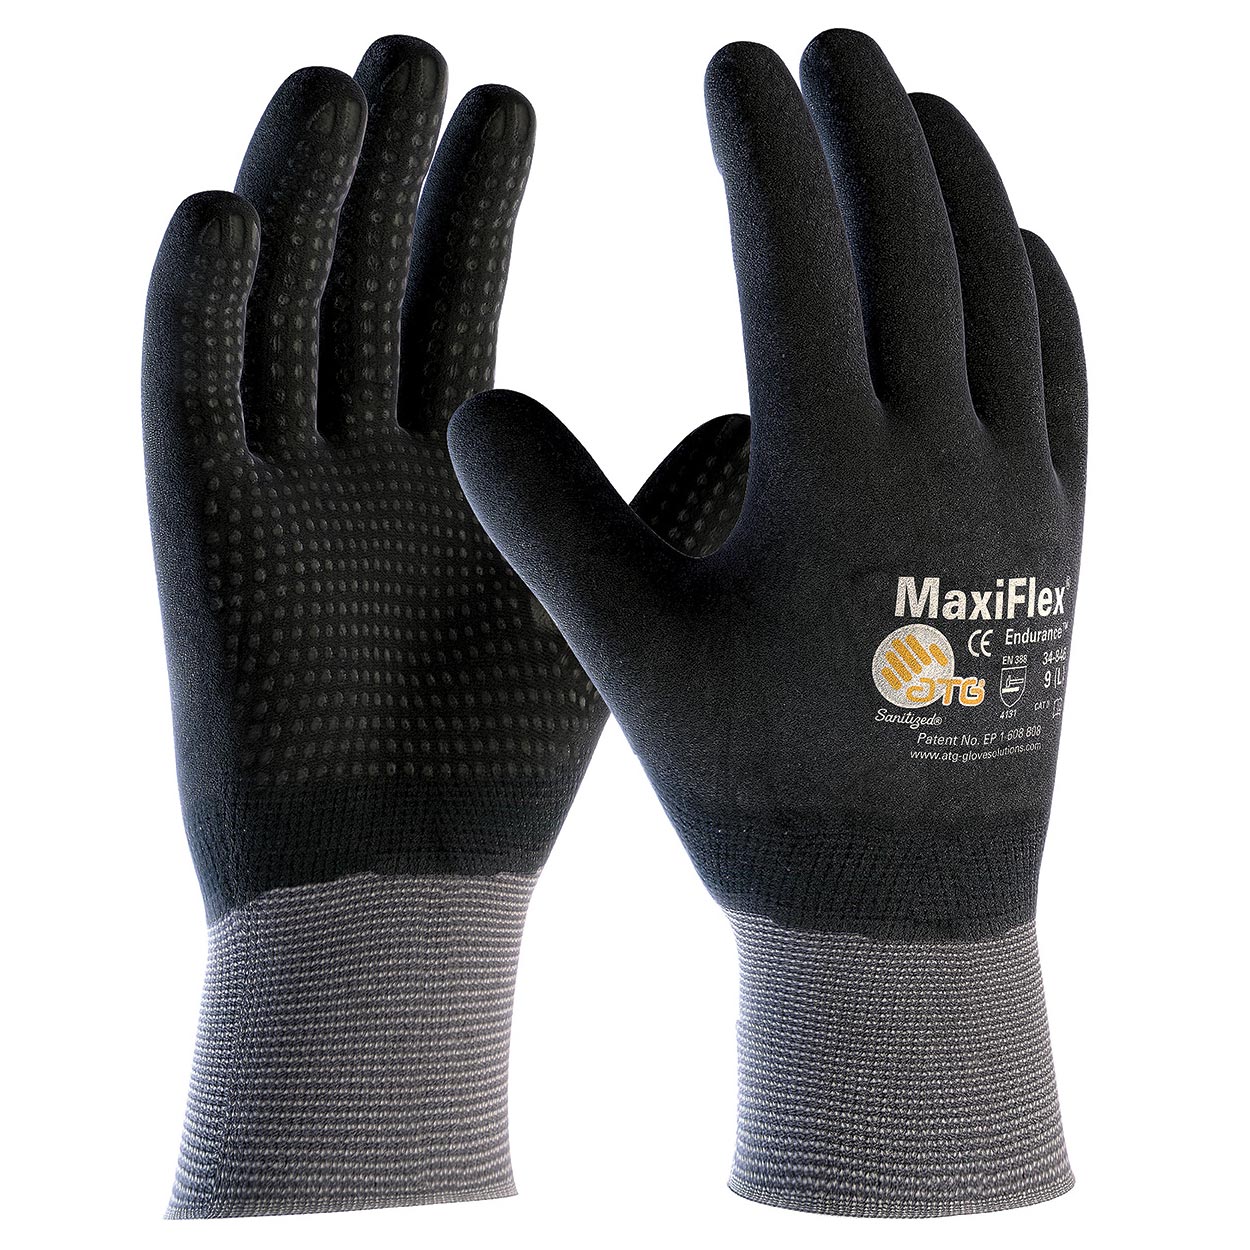 PIP 34-846 MaxiFlex Endurance Seamless Knit Nylon Gloves with Nitrile Coated on Full Hand (12 Pairs)-eSafety Supplies, Inc